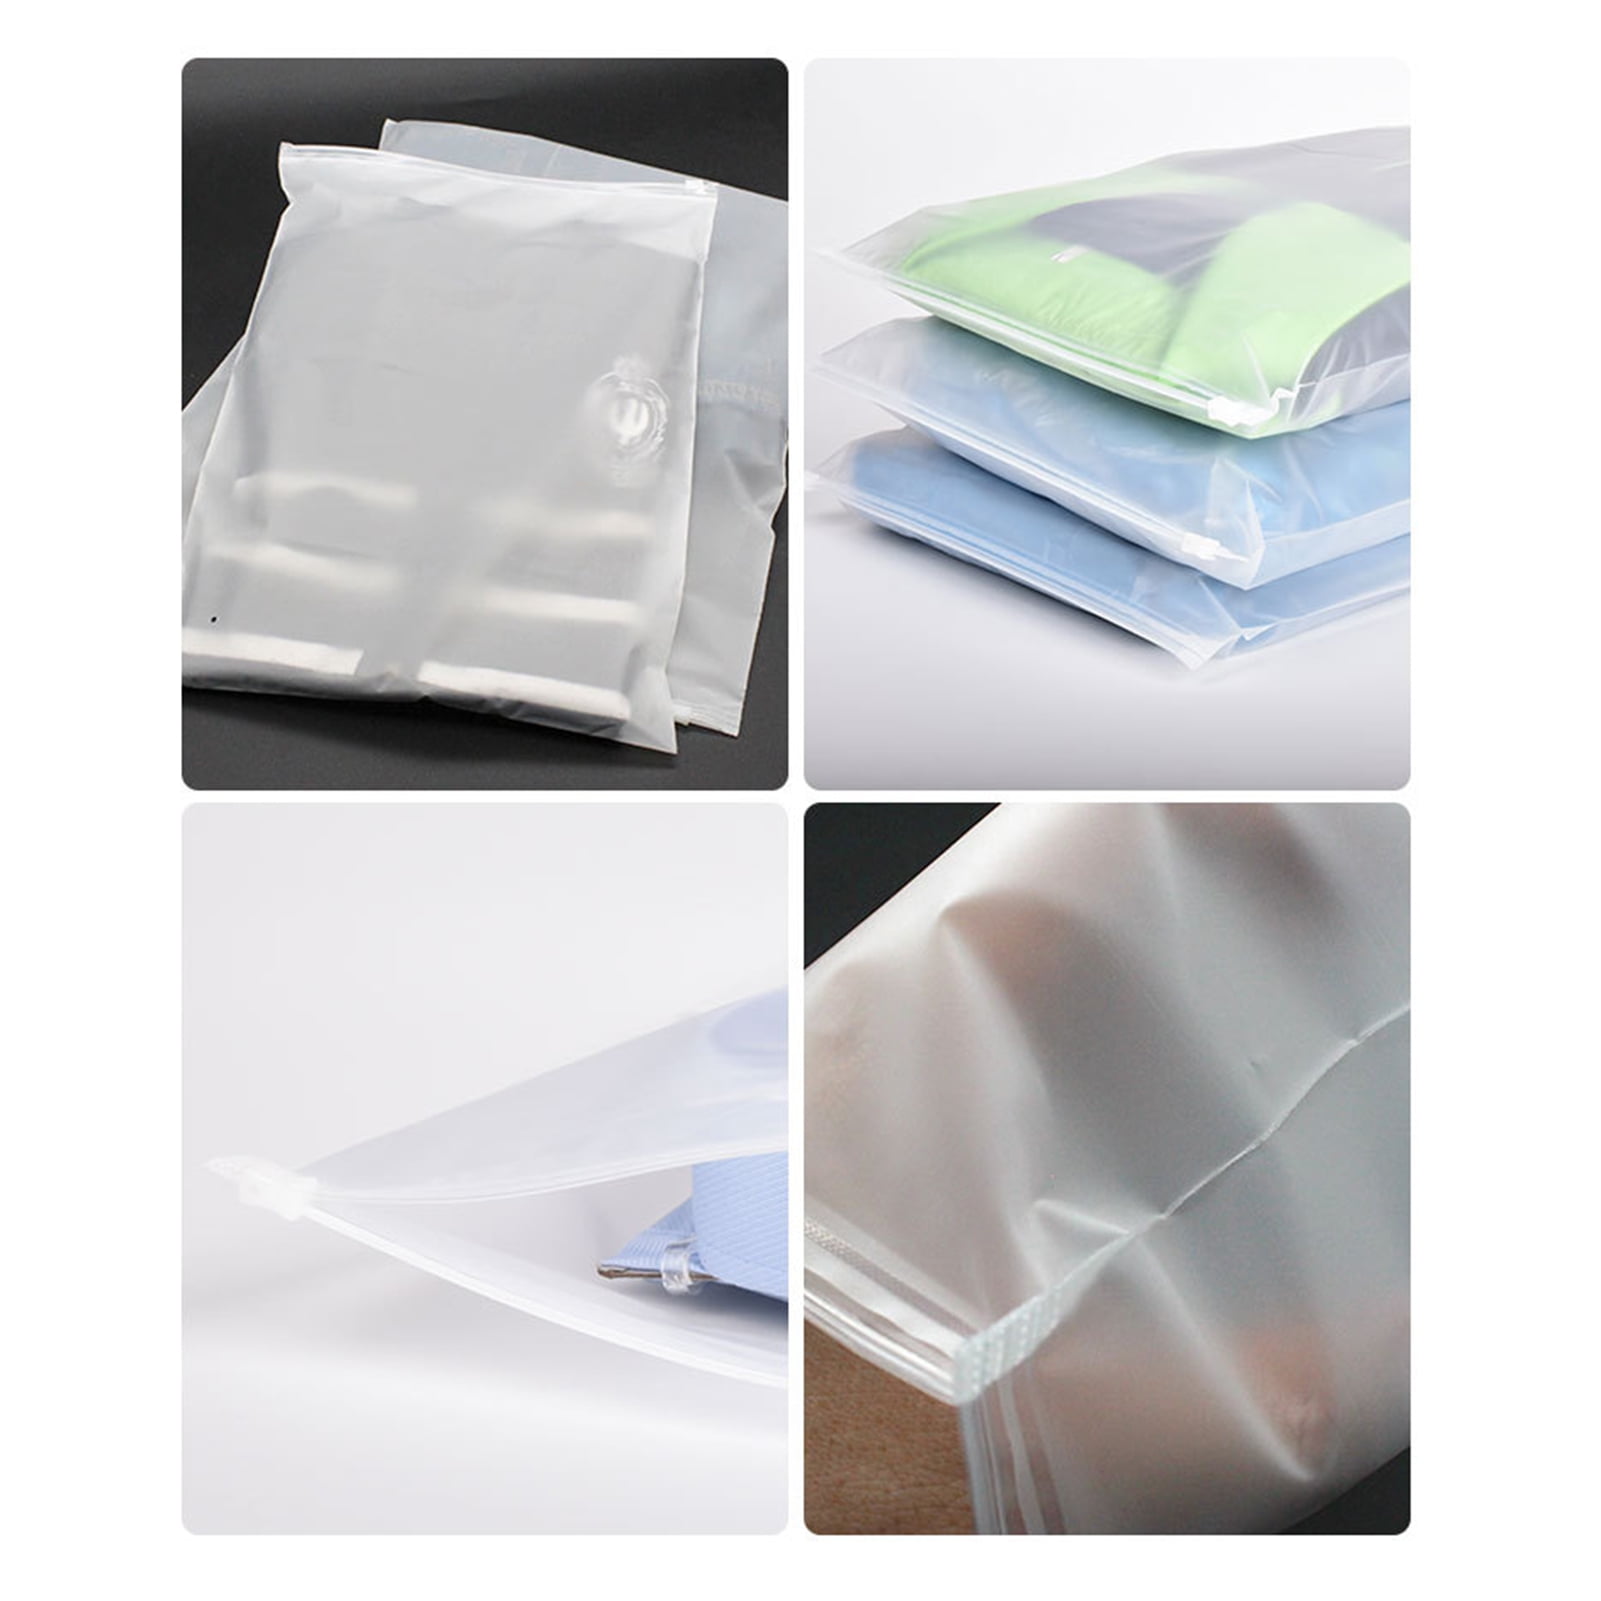 Svaldo Packaging Clothing Bags, 50PCS 12x16 inch Poly Plastic Bag for  Clothes, Frosted Ziplock Bags for Packing Selling Apparel Organization,  Custom